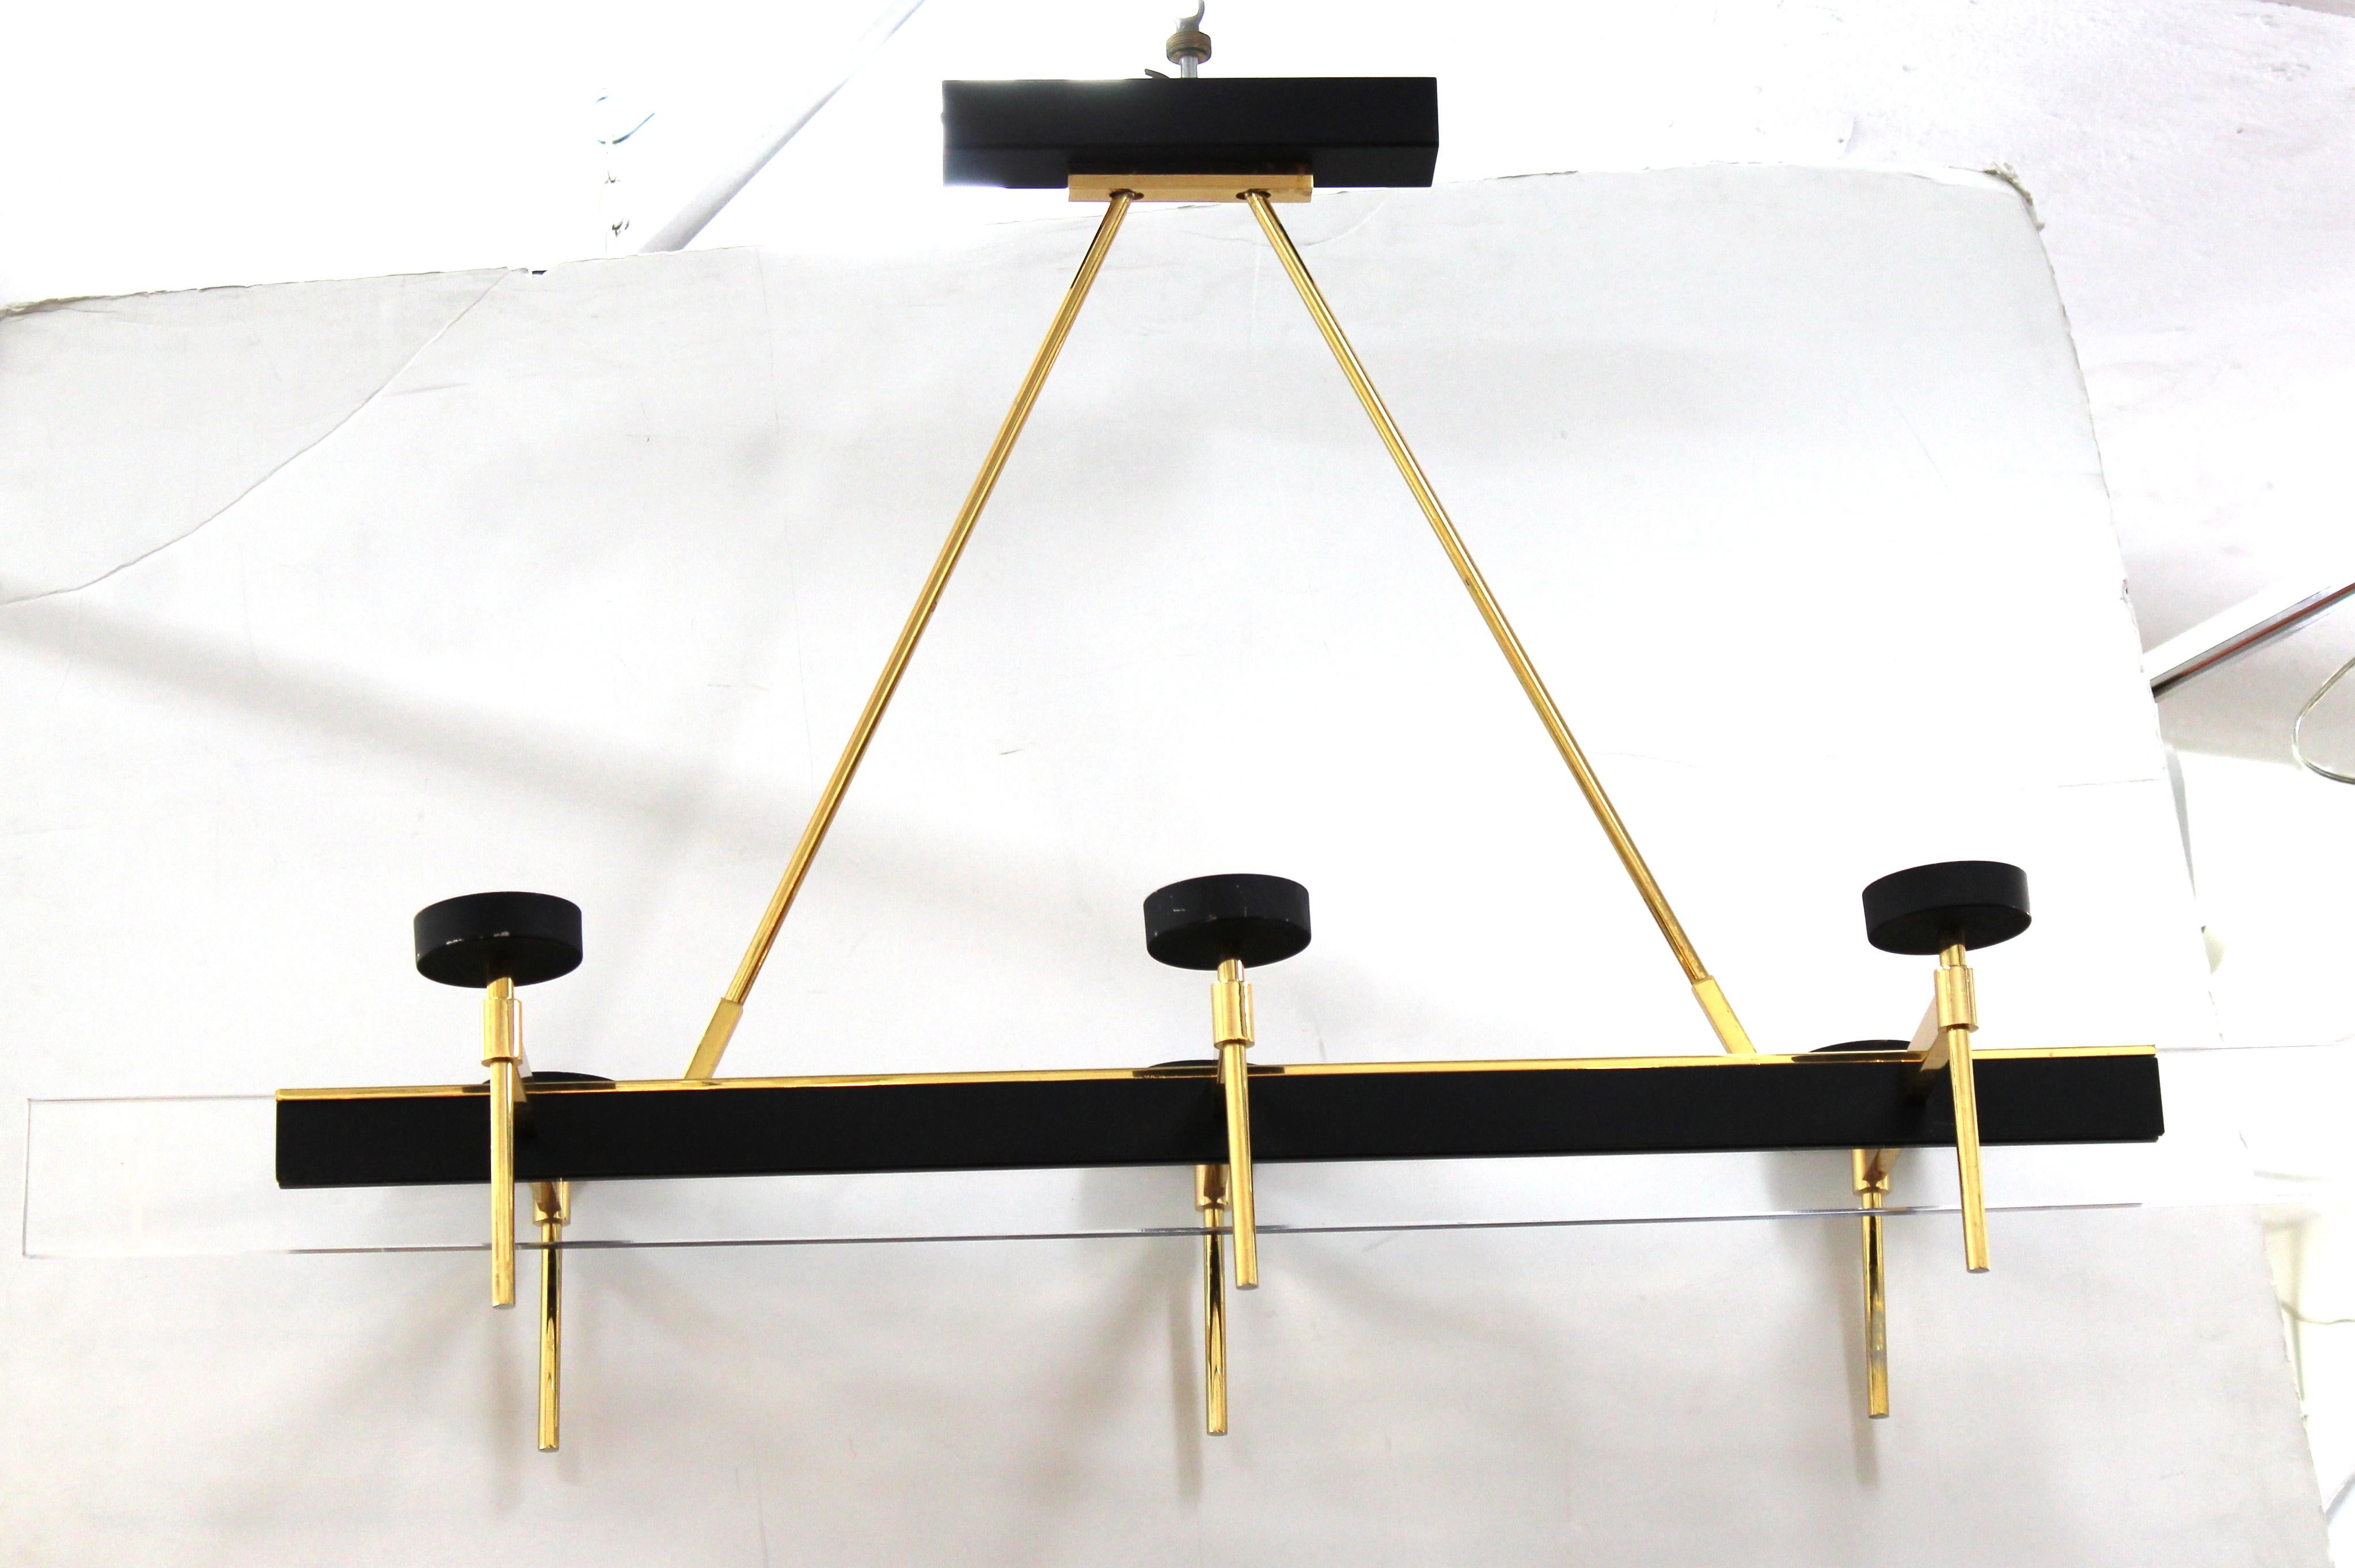 Italian Stilnovo style chandelier with six-light bases in brass and black metal structure. The piece is in great vintage condition.